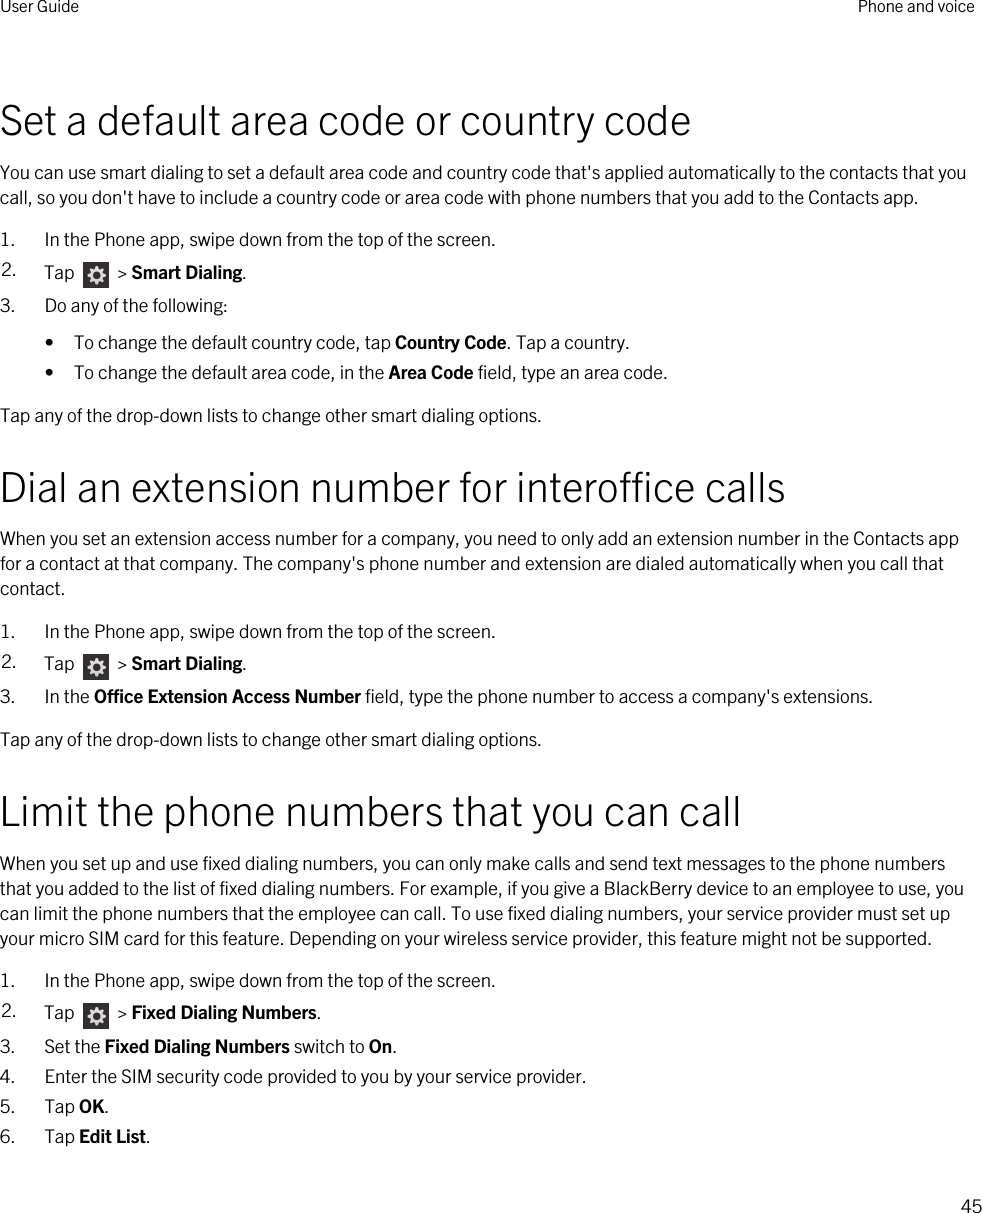 Set a default area code or country codeYou can use smart dialing to set a default area code and country code that&apos;s applied automatically to the contacts that you call, so you don&apos;t have to include a country code or area code with phone numbers that you add to the Contacts app.1. In the Phone app, swipe down from the top of the screen.2. Tap   &gt; Smart Dialing.3. Do any of the following:• To change the default country code, tap Country Code. Tap a country.• To change the default area code, in the Area Code field, type an area code.Tap any of the drop-down lists to change other smart dialing options.Dial an extension number for interoffice callsWhen you set an extension access number for a company, you need to only add an extension number in the Contacts app for a contact at that company. The company&apos;s phone number and extension are dialed automatically when you call that contact.1. In the Phone app, swipe down from the top of the screen.2. Tap   &gt; Smart Dialing.3. In the Office Extension Access Number field, type the phone number to access a company&apos;s extensions.Tap any of the drop-down lists to change other smart dialing options.Limit the phone numbers that you can callWhen you set up and use fixed dialing numbers, you can only make calls and send text messages to the phone numbers that you added to the list of fixed dialing numbers. For example, if you give a BlackBerry device to an employee to use, you can limit the phone numbers that the employee can call. To use fixed dialing numbers, your service provider must set up your micro SIM card for this feature. Depending on your wireless service provider, this feature might not be supported. 1. In the Phone app, swipe down from the top of the screen.2. Tap   &gt; Fixed Dialing Numbers.3. Set the Fixed Dialing Numbers switch to On.4. Enter the SIM security code provided to you by your service provider.5. Tap OK.6. Tap Edit List.User Guide Phone and voice45